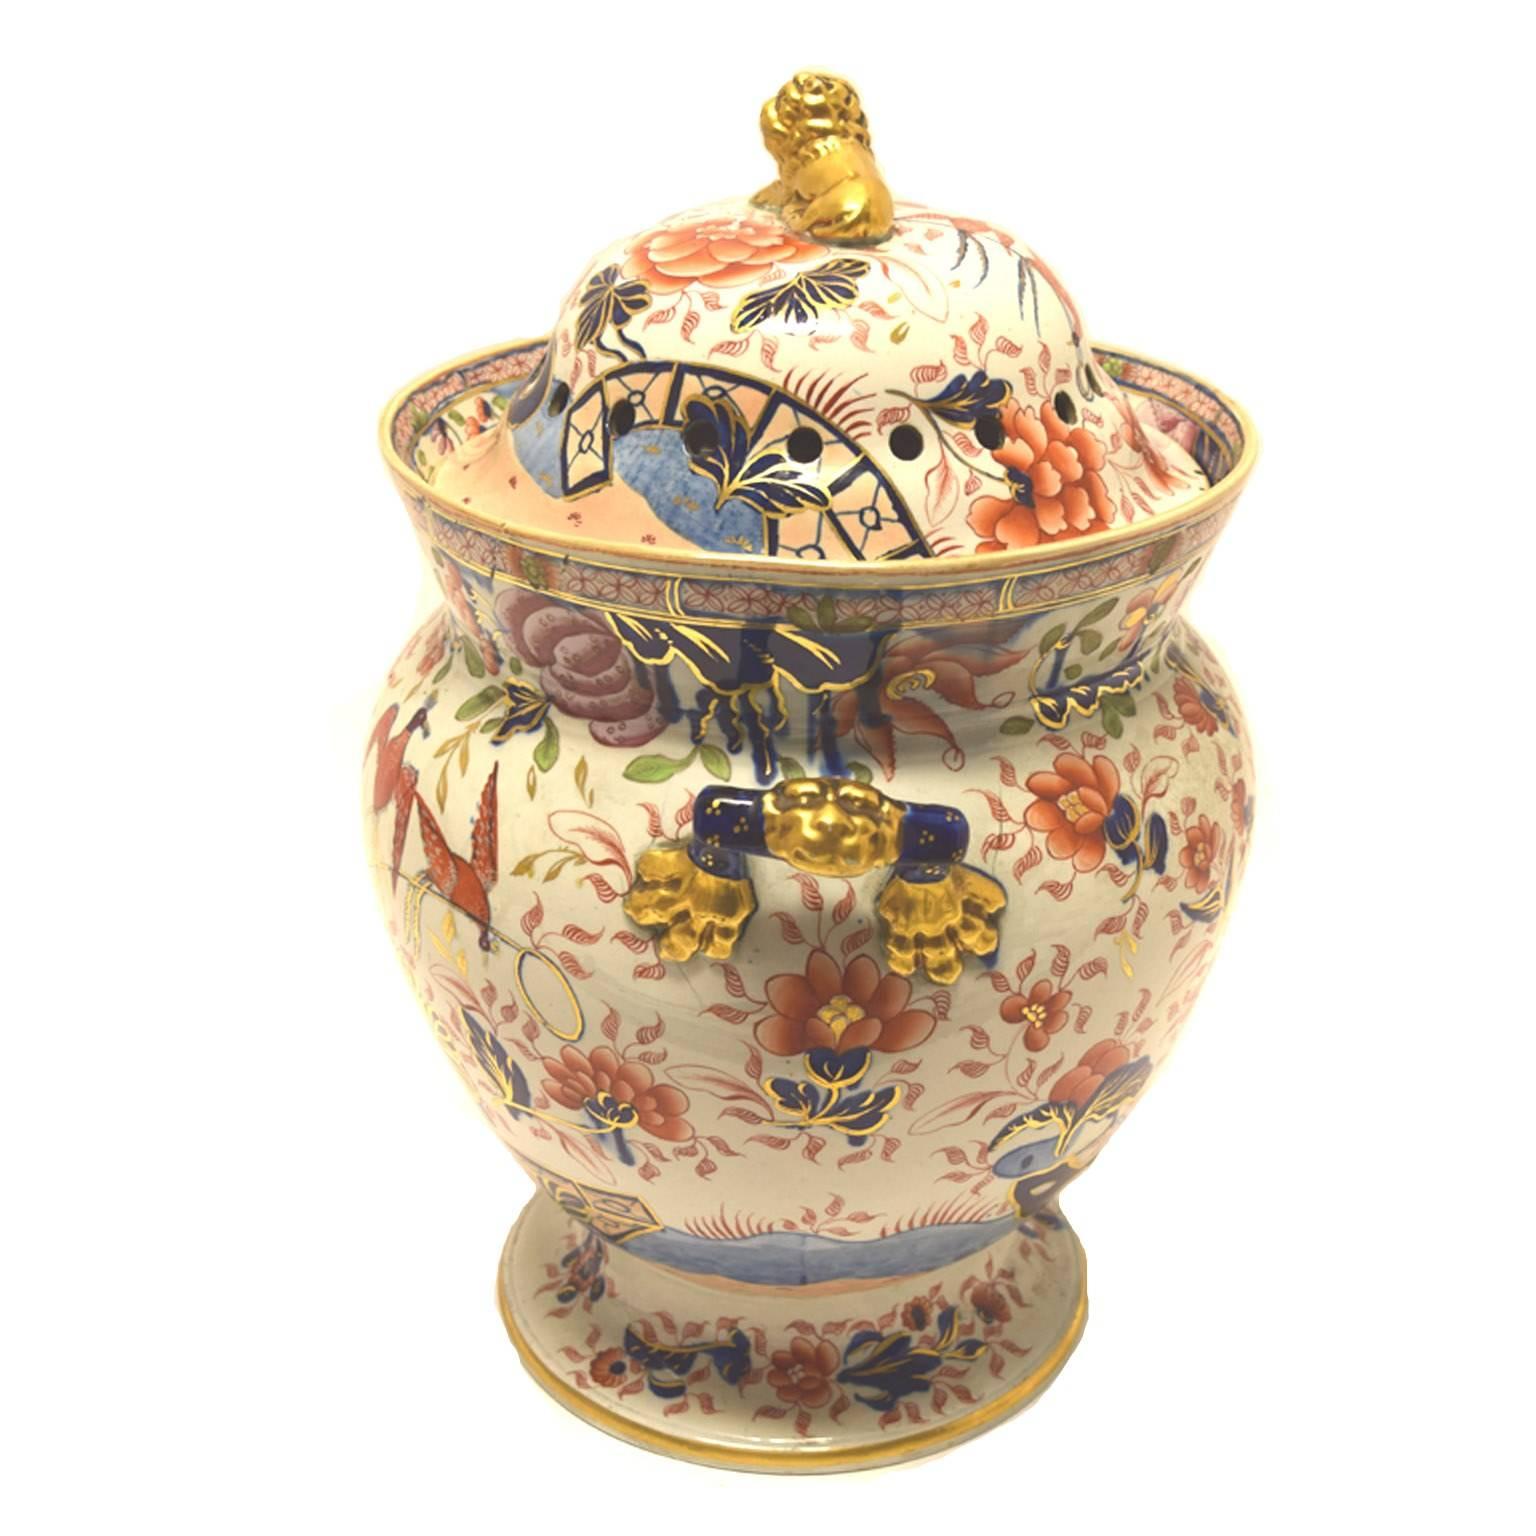 English George IV period Mason's Ironstone potpourri with original cover with gilt lion finial, inner lid with urn-form finial, lion paw side handles, richly painted in underglaze cobalt blue and over painted with bright enamels of chrysanthemum and